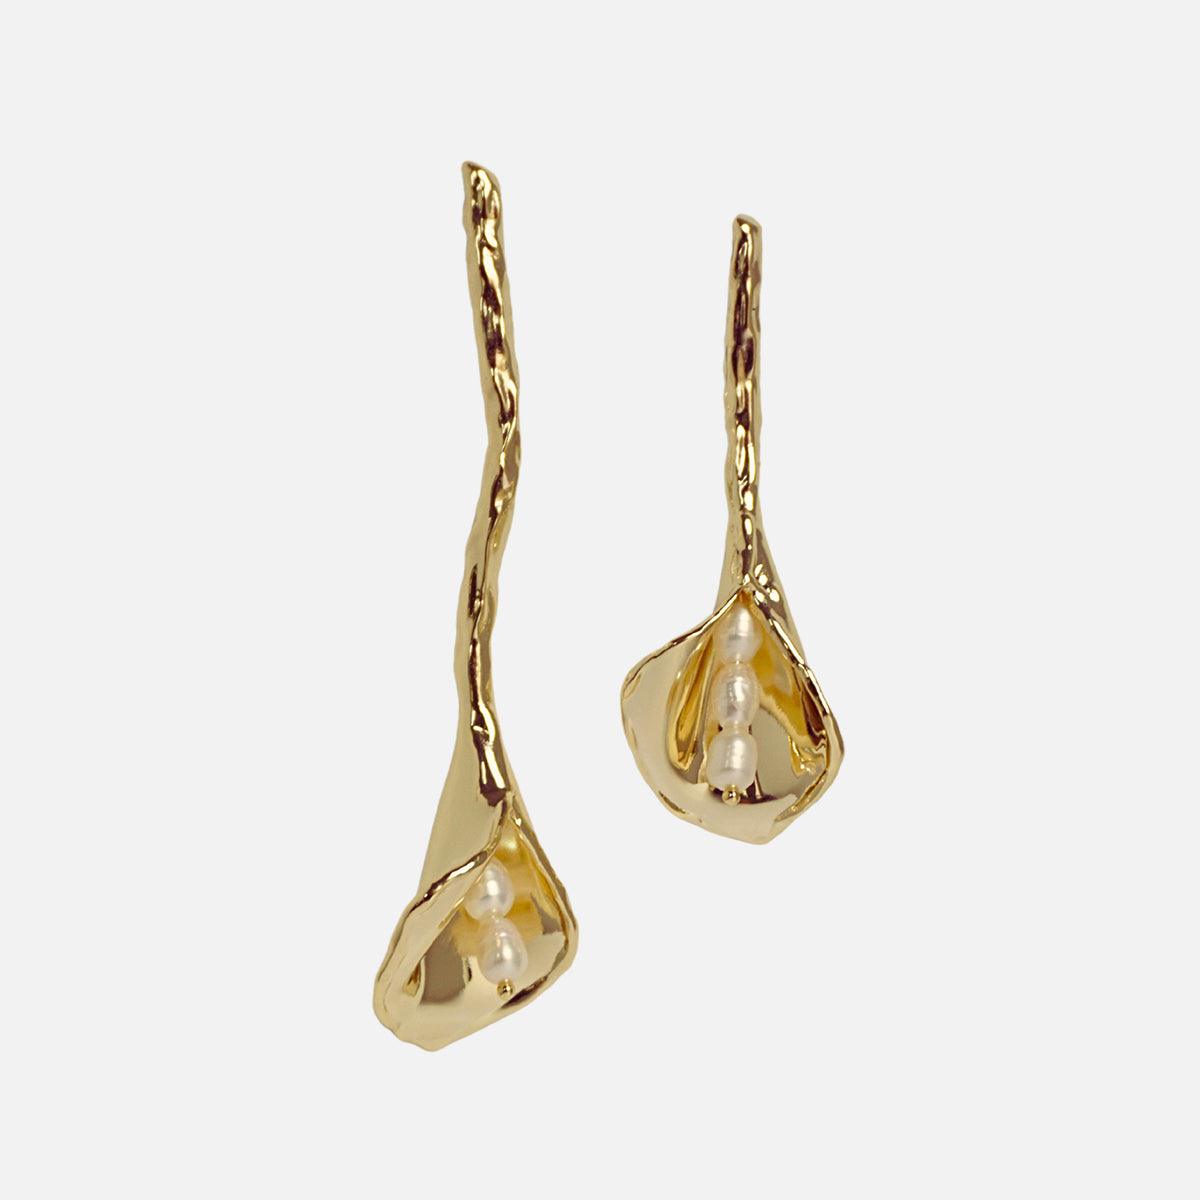 Calla Lily Earrings - At Present